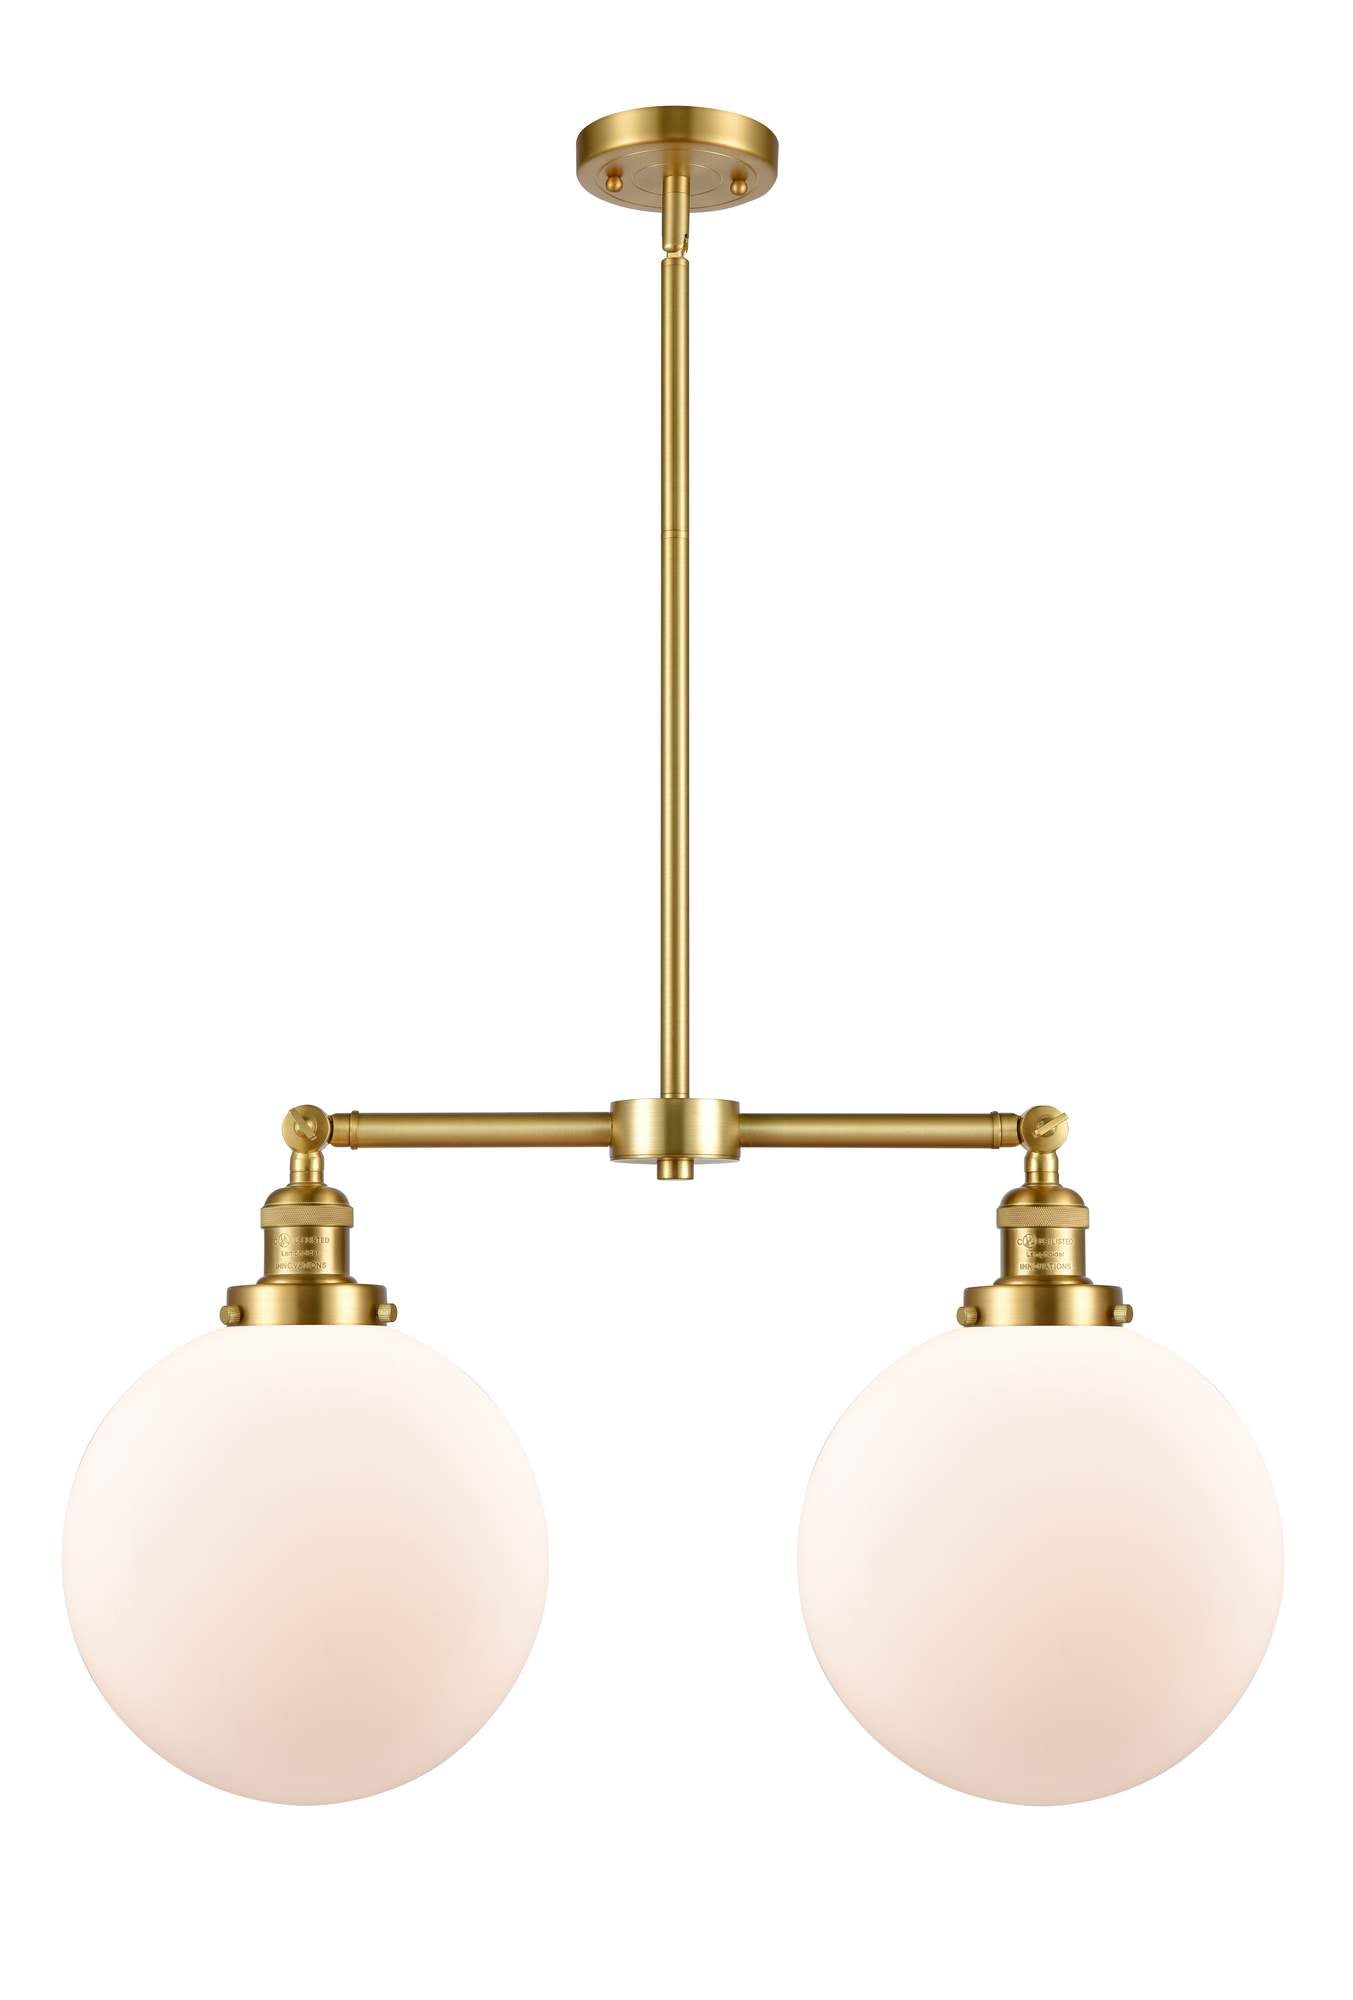 209-SG-G201-10 2-Light 25" Satin Gold Island Light - Matte White Cased Beacon Glass - LED Bulb - Dimmensions: 25 x 10 x 14<br>Minimum Height : 24.875<br>Maximum Height : 48.875 - Sloped Ceiling Compatible: Yes